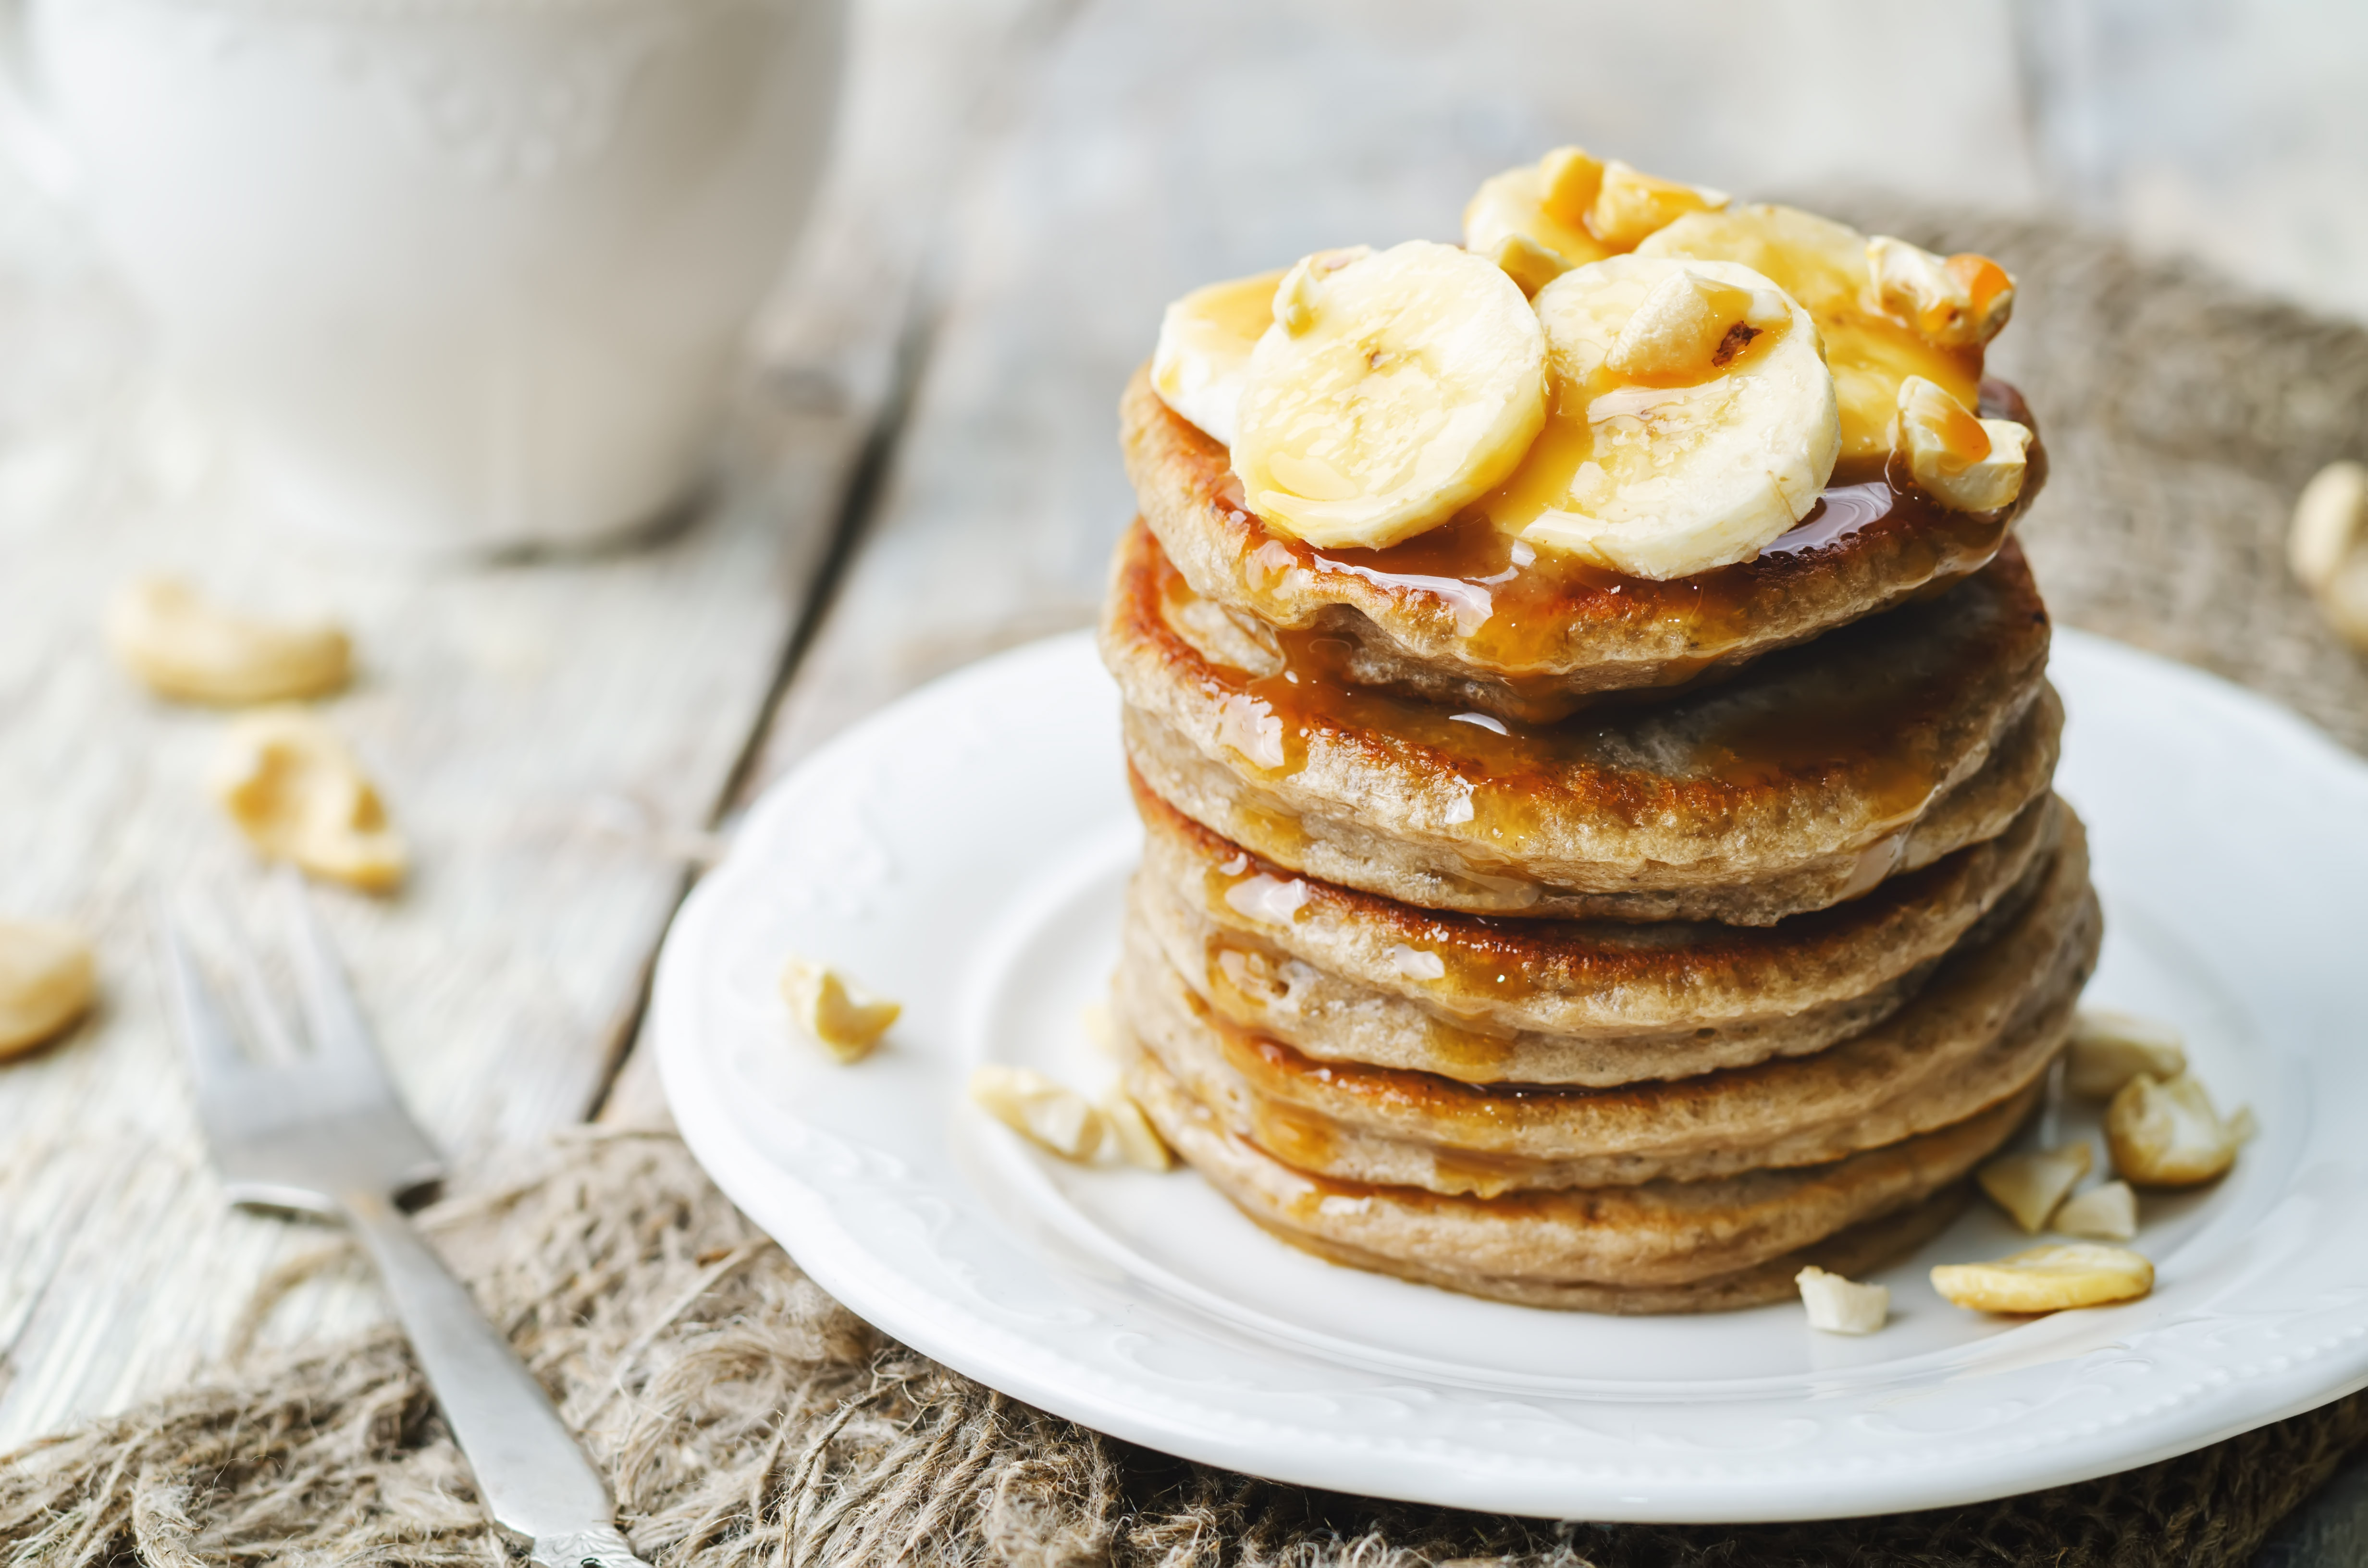 PANCAKES WITH FRESH BANANA AND WARM CARAMEL DRIZZLE